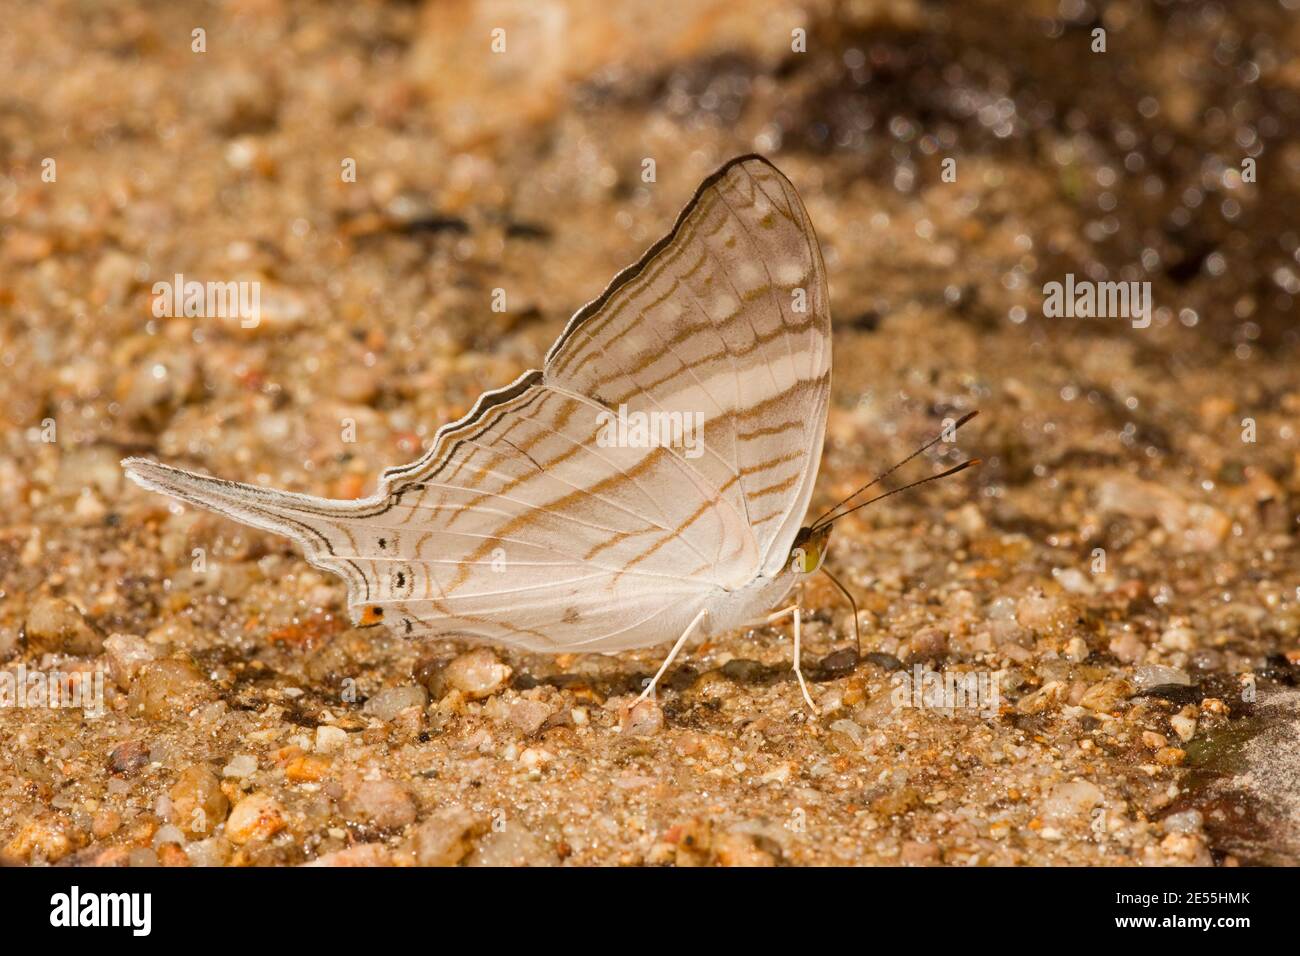 White-banded Daggerwing Butterfly, Marpesia crethon, Nymphalidae. Ventral view. Stock Photo